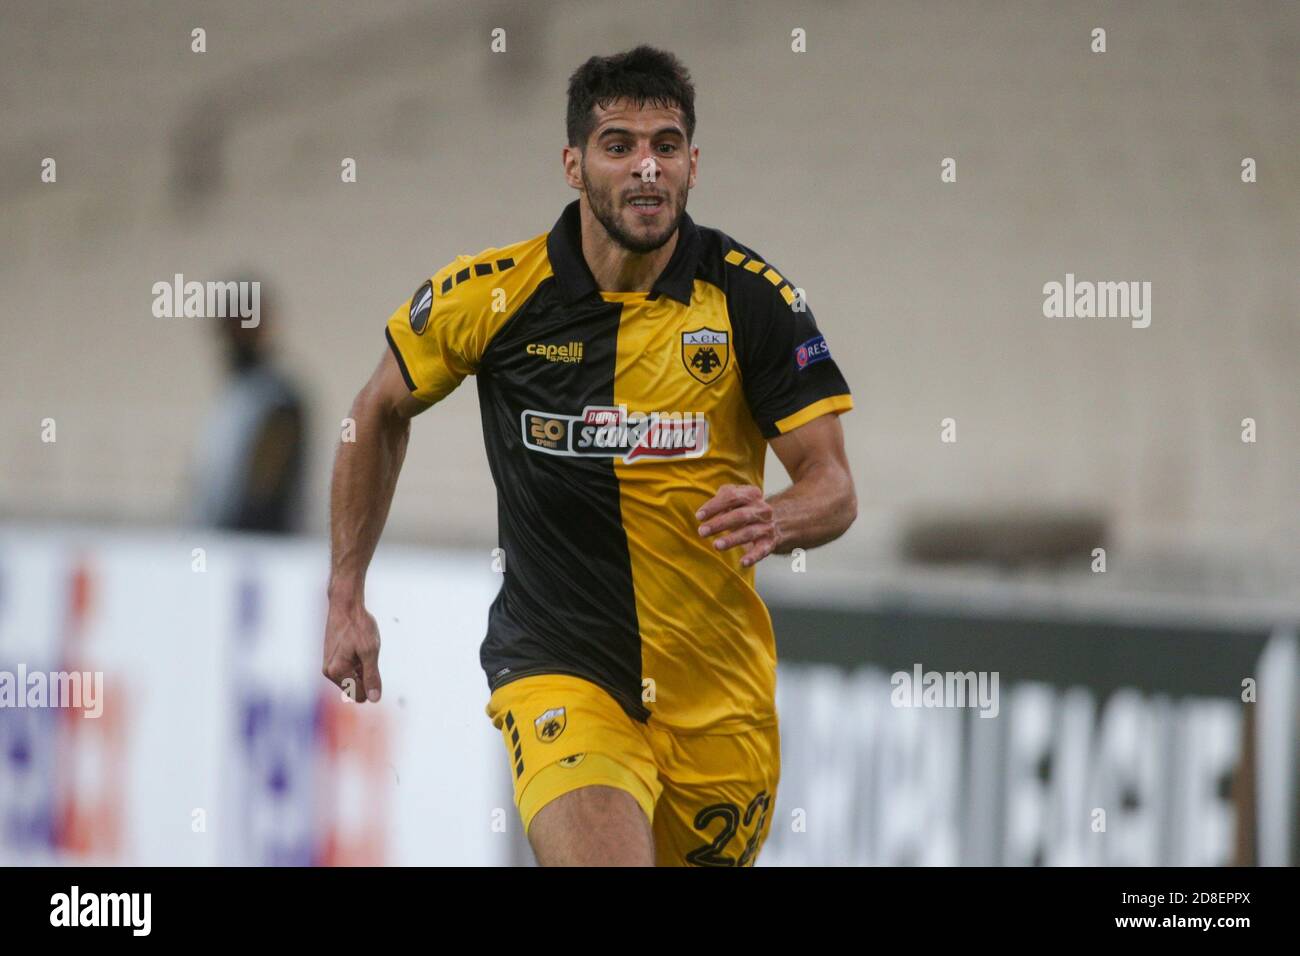 ATHENS, GREECE - OCTOBER 29: Emanuel Insua of AEK Athens during the UEFA  Europa League Group G stage match between AEK Athens and Leicester City at  Athens Olympic Stadium on October 29,